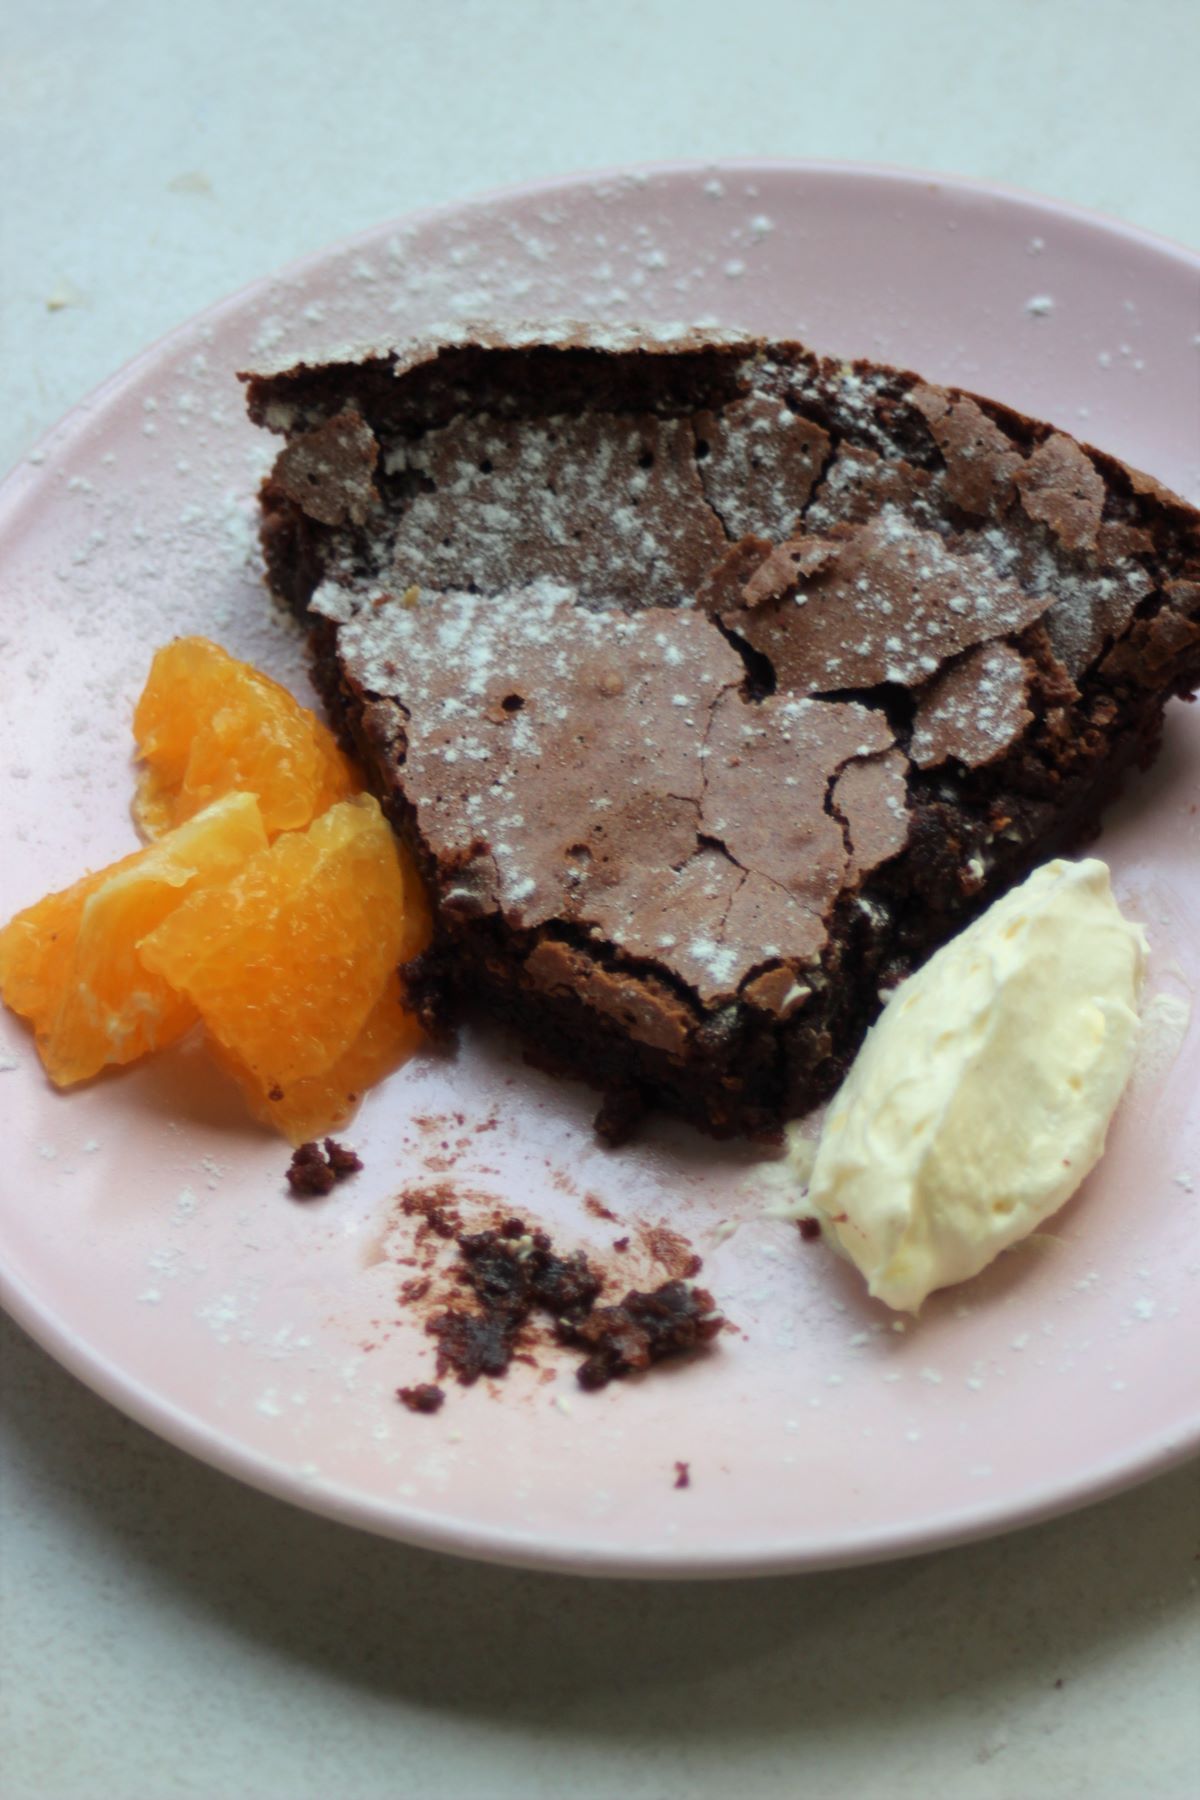 Portion of chocolate cake, without a piece, with oranges slices and whipped cream on a pink plate.